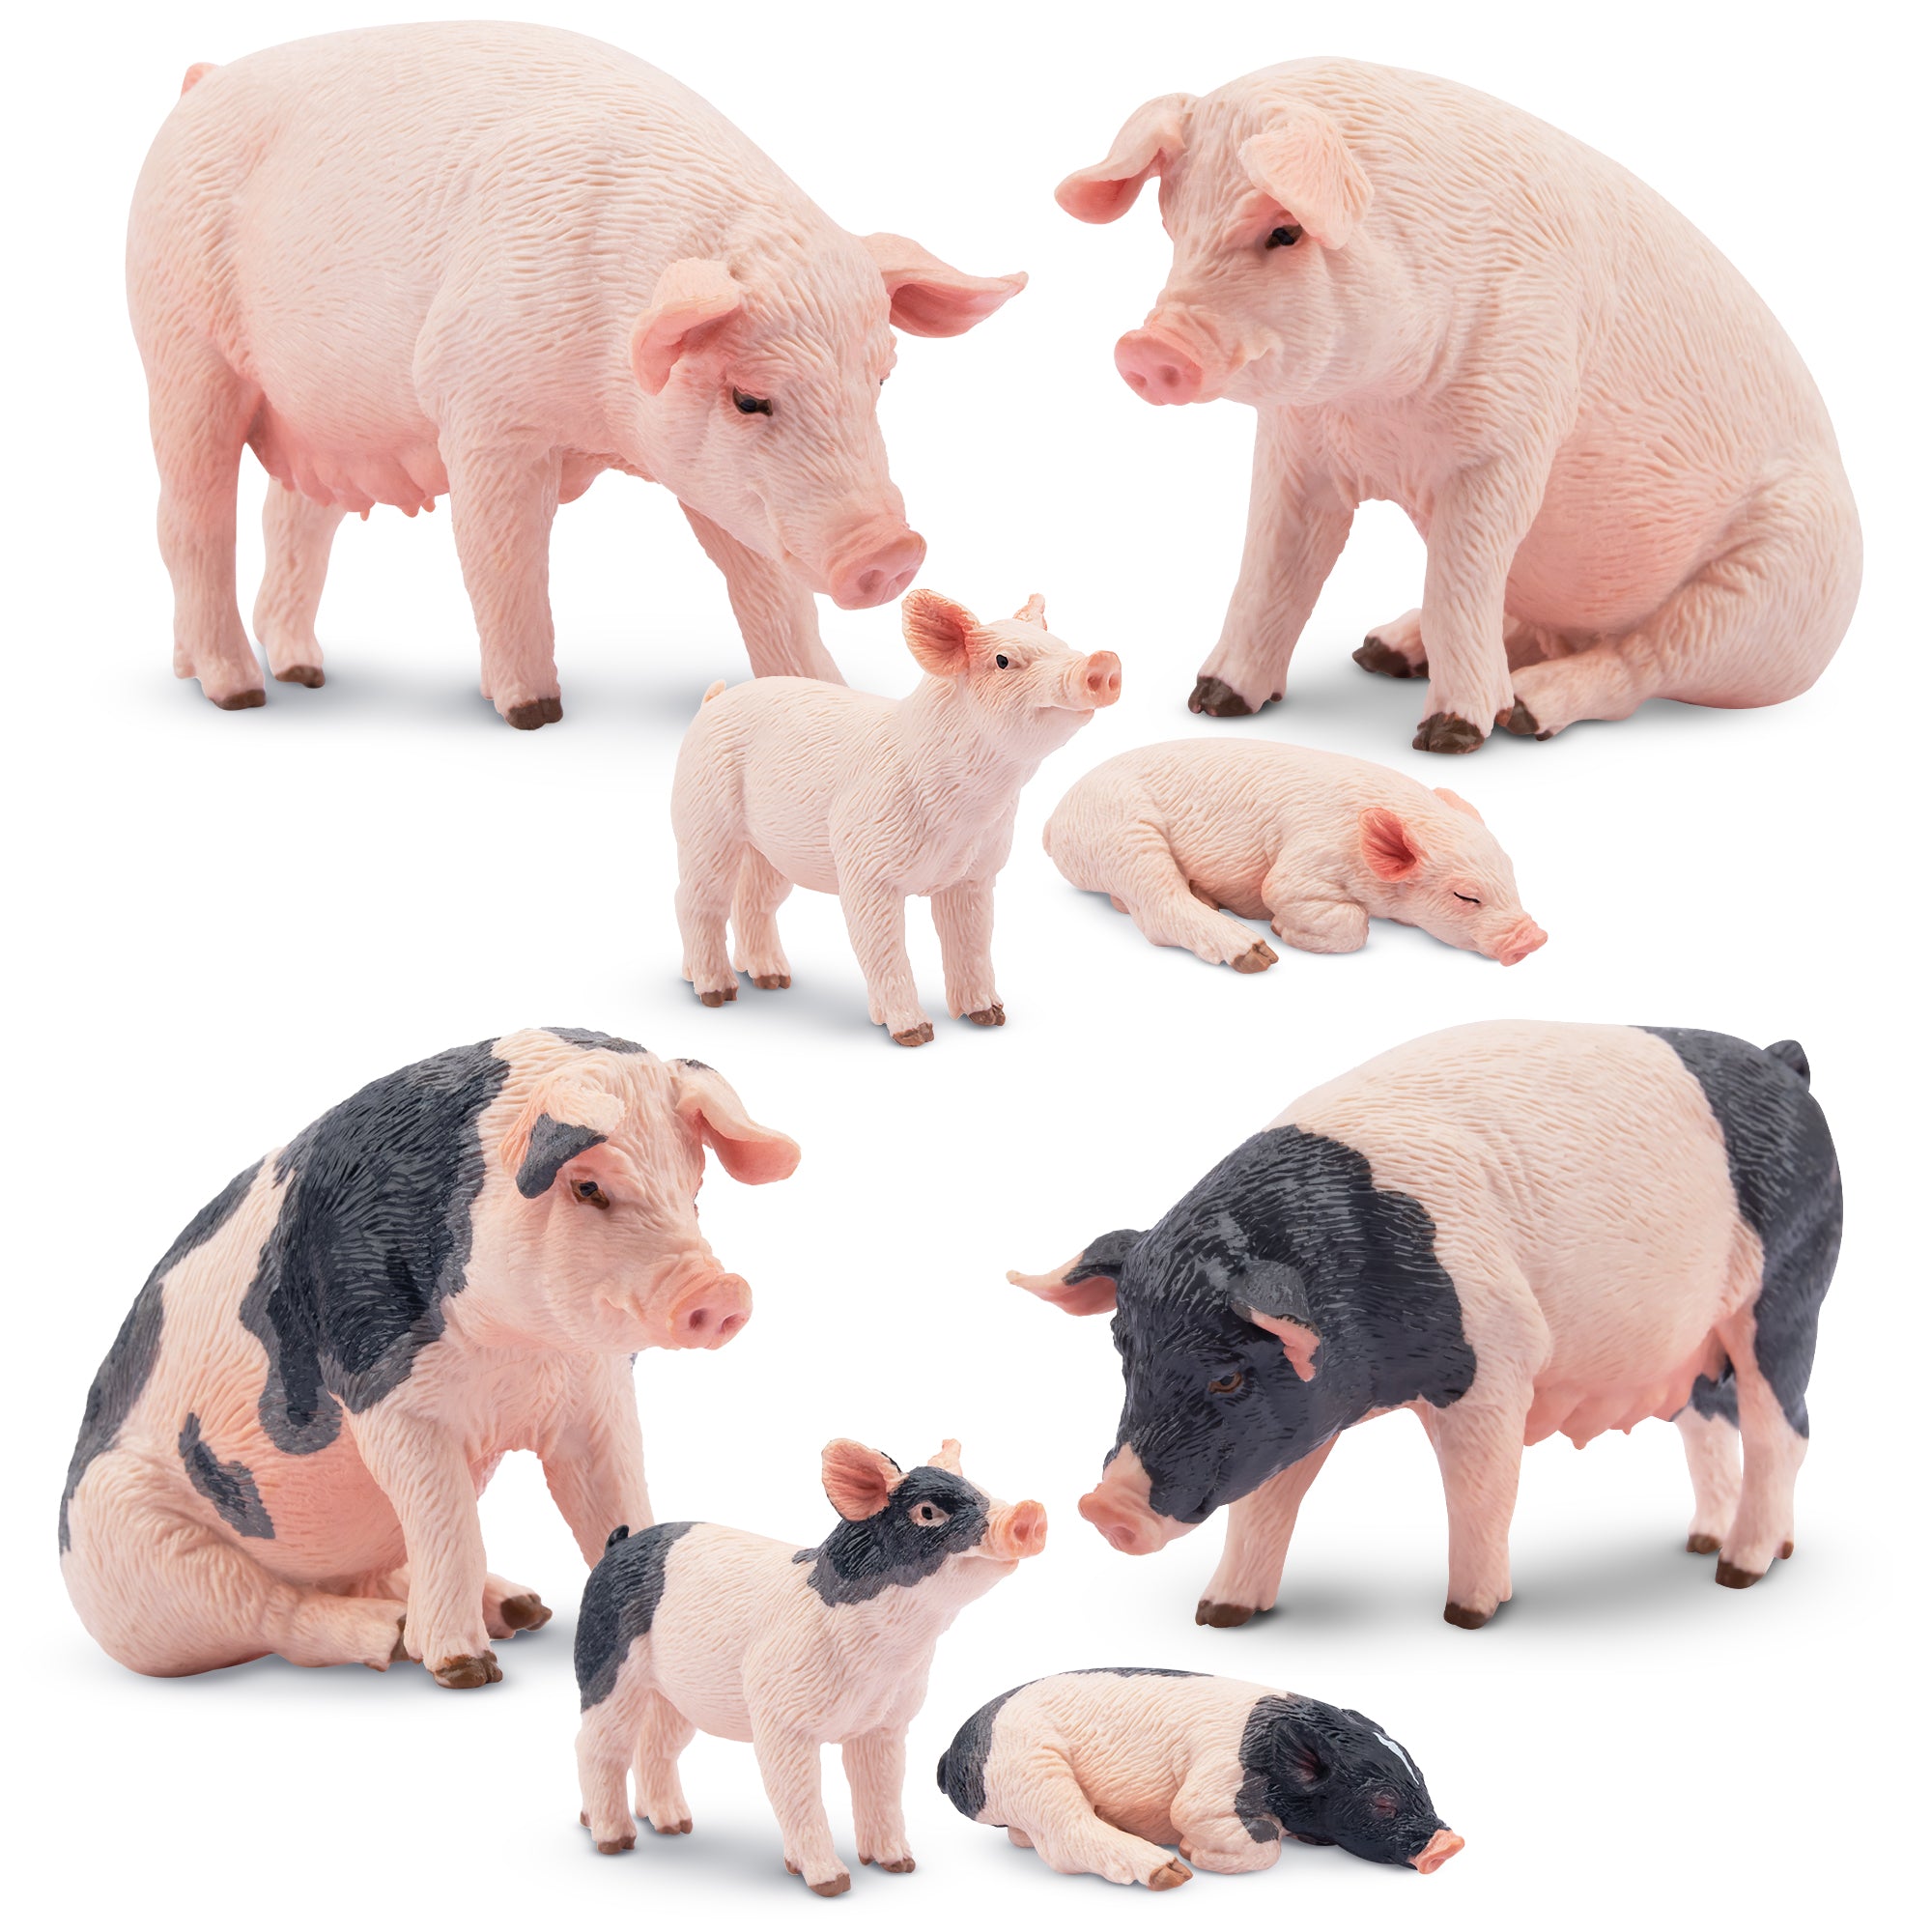 8-Piece Pig Family Figurines Playset with Adult & Baby Pigs-2